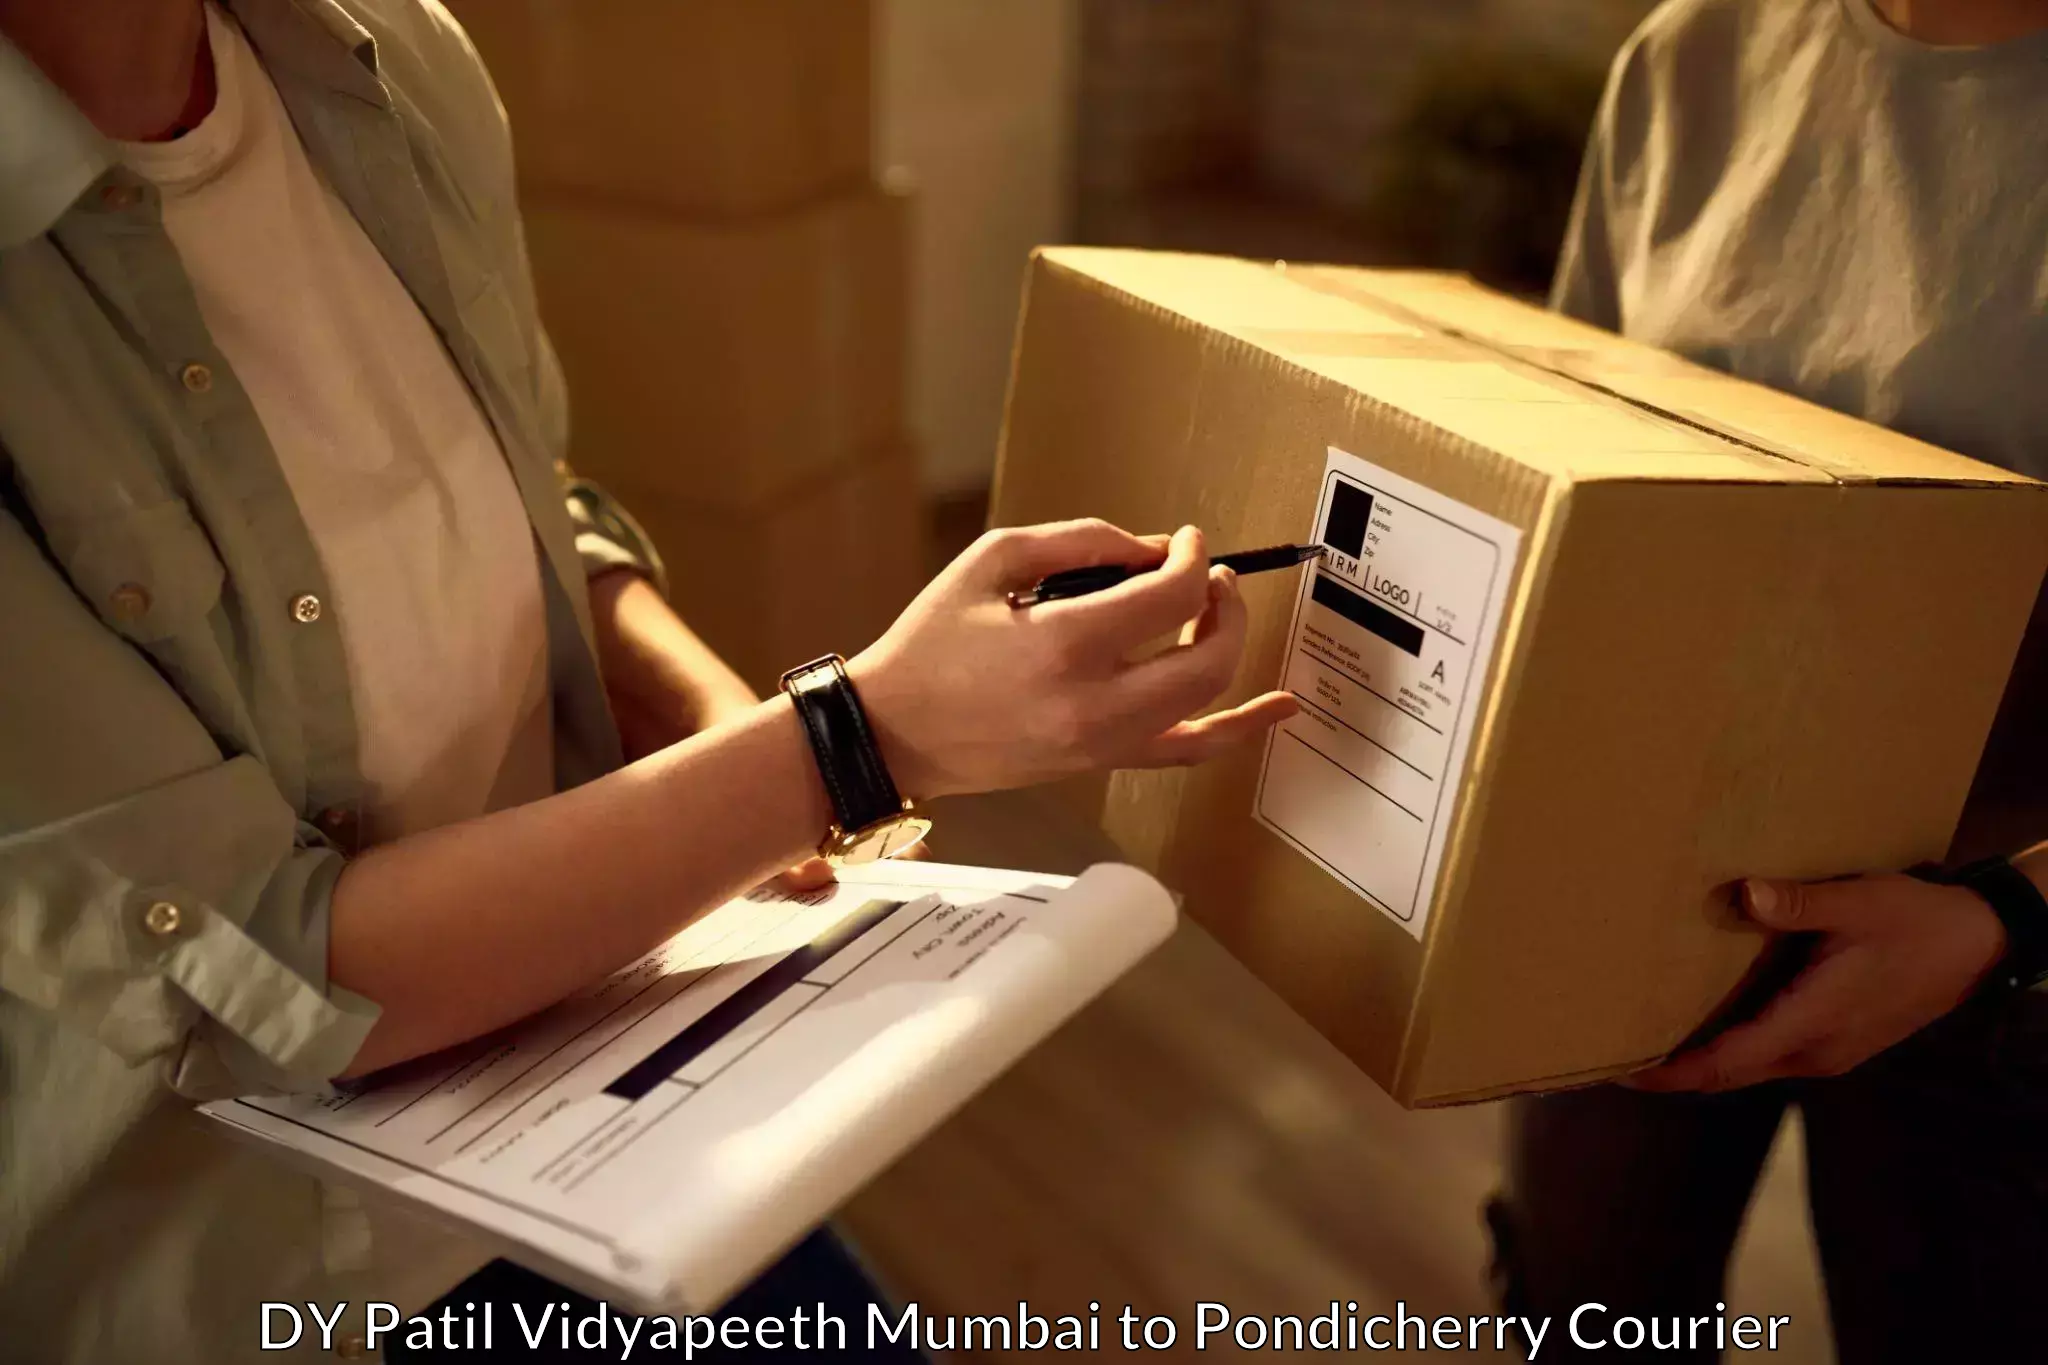 Expedited parcel delivery DY Patil Vidyapeeth Mumbai to Pondicherry